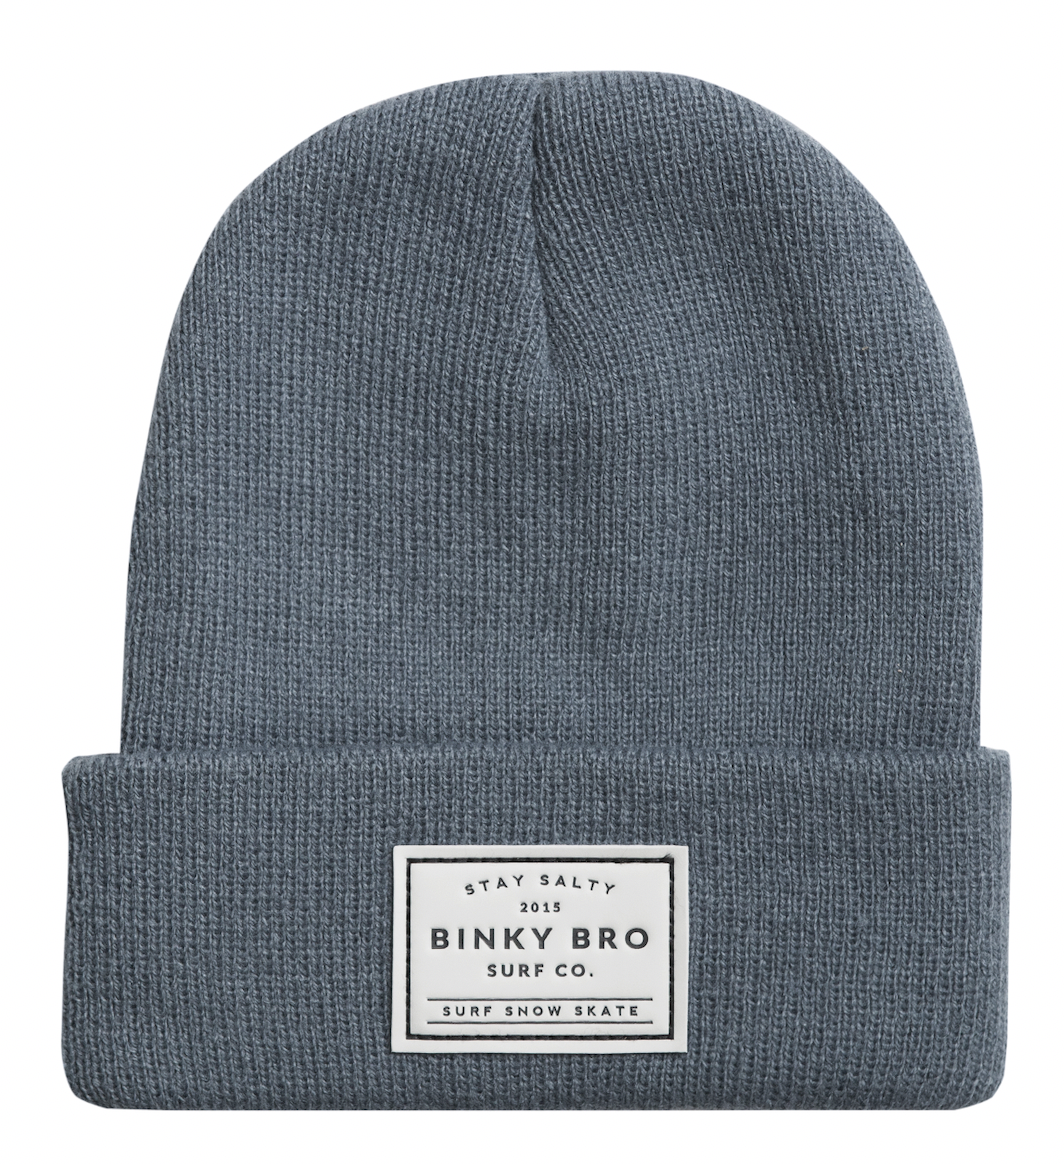 Tahoe - Slate Beanie: Infant (4 months - 12 months)